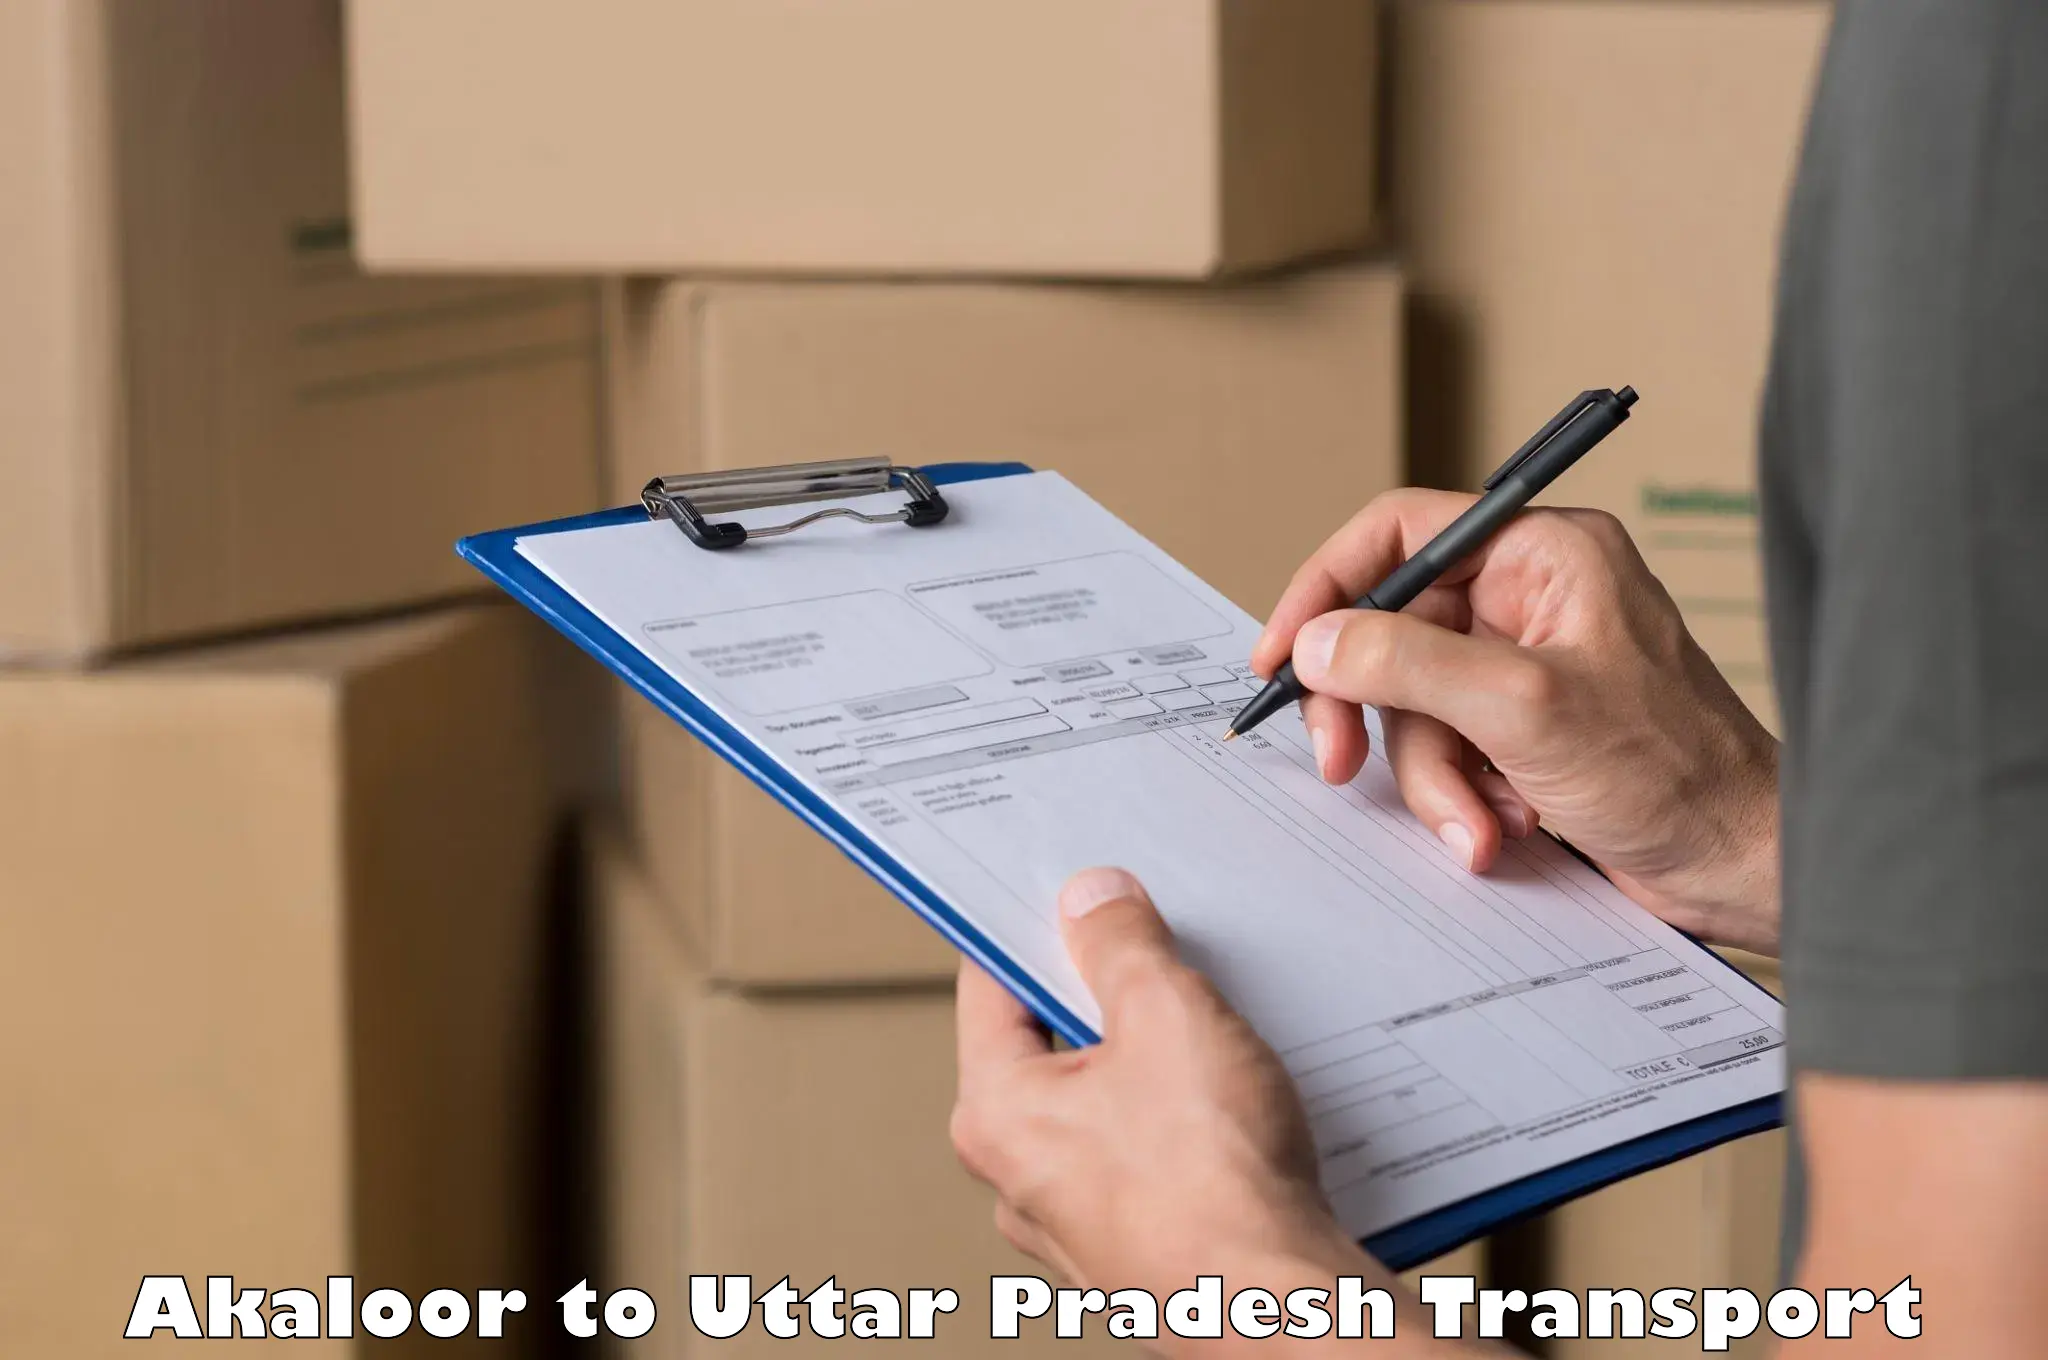 Parcel transport services Akaloor to Kanpur